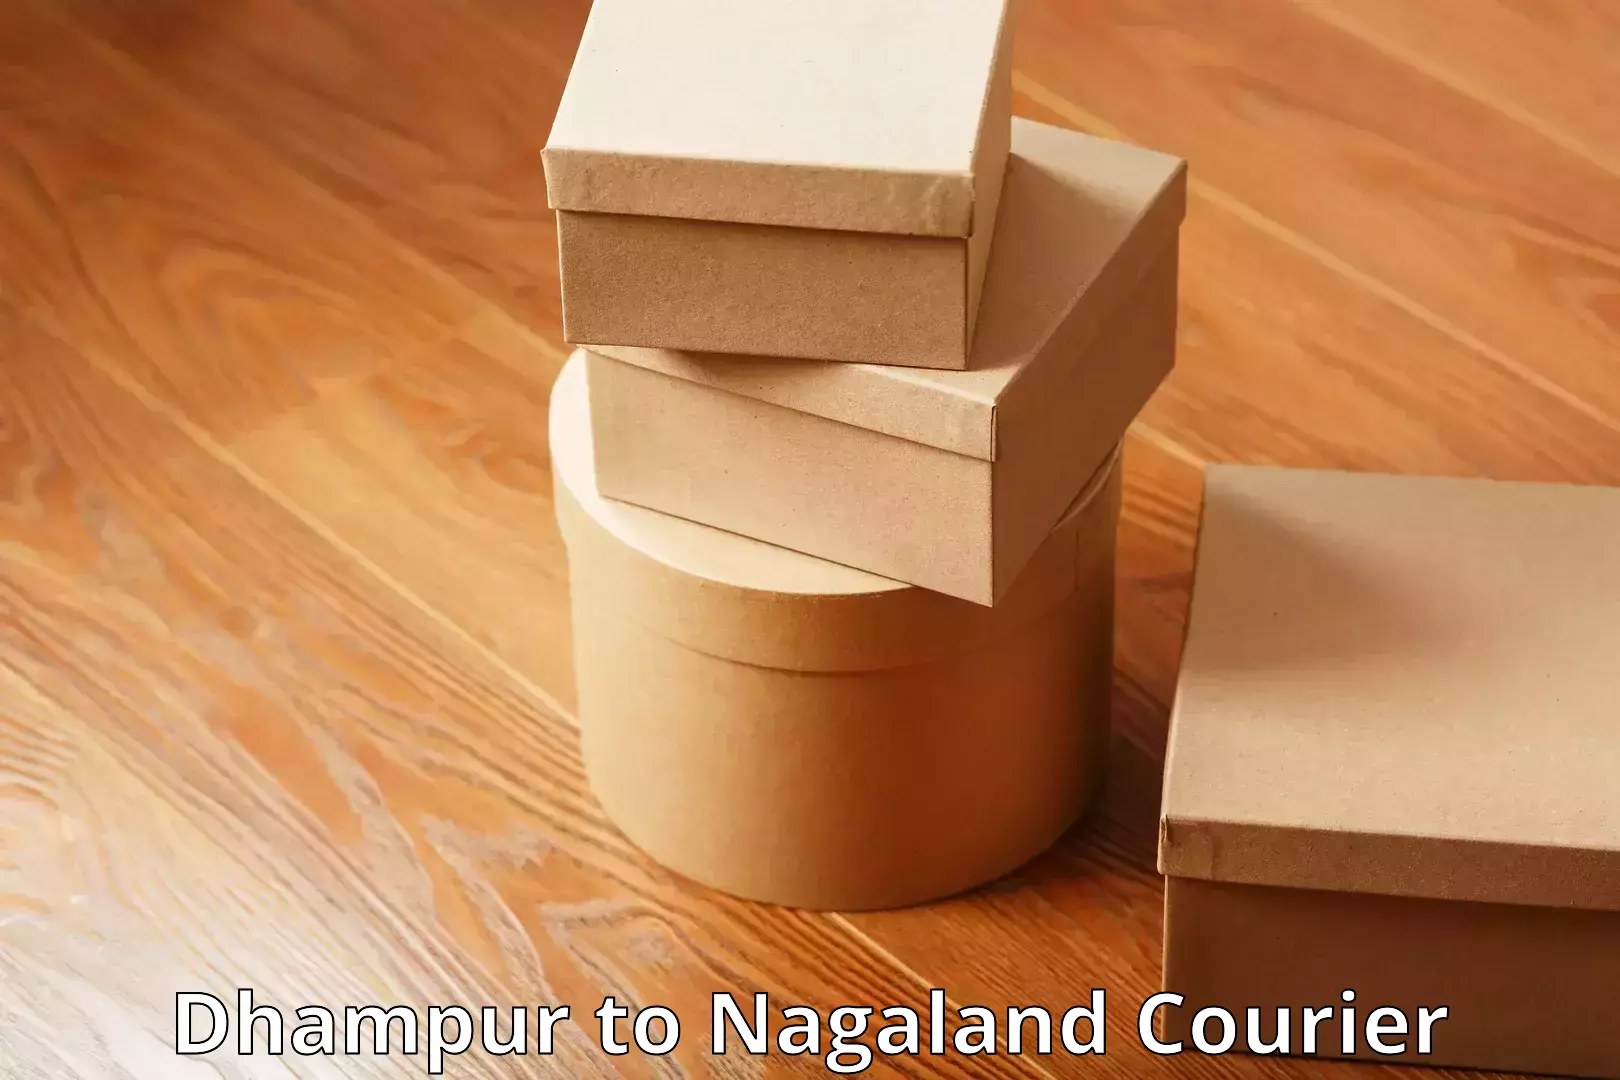 Luggage shipment specialists Dhampur to Nagaland